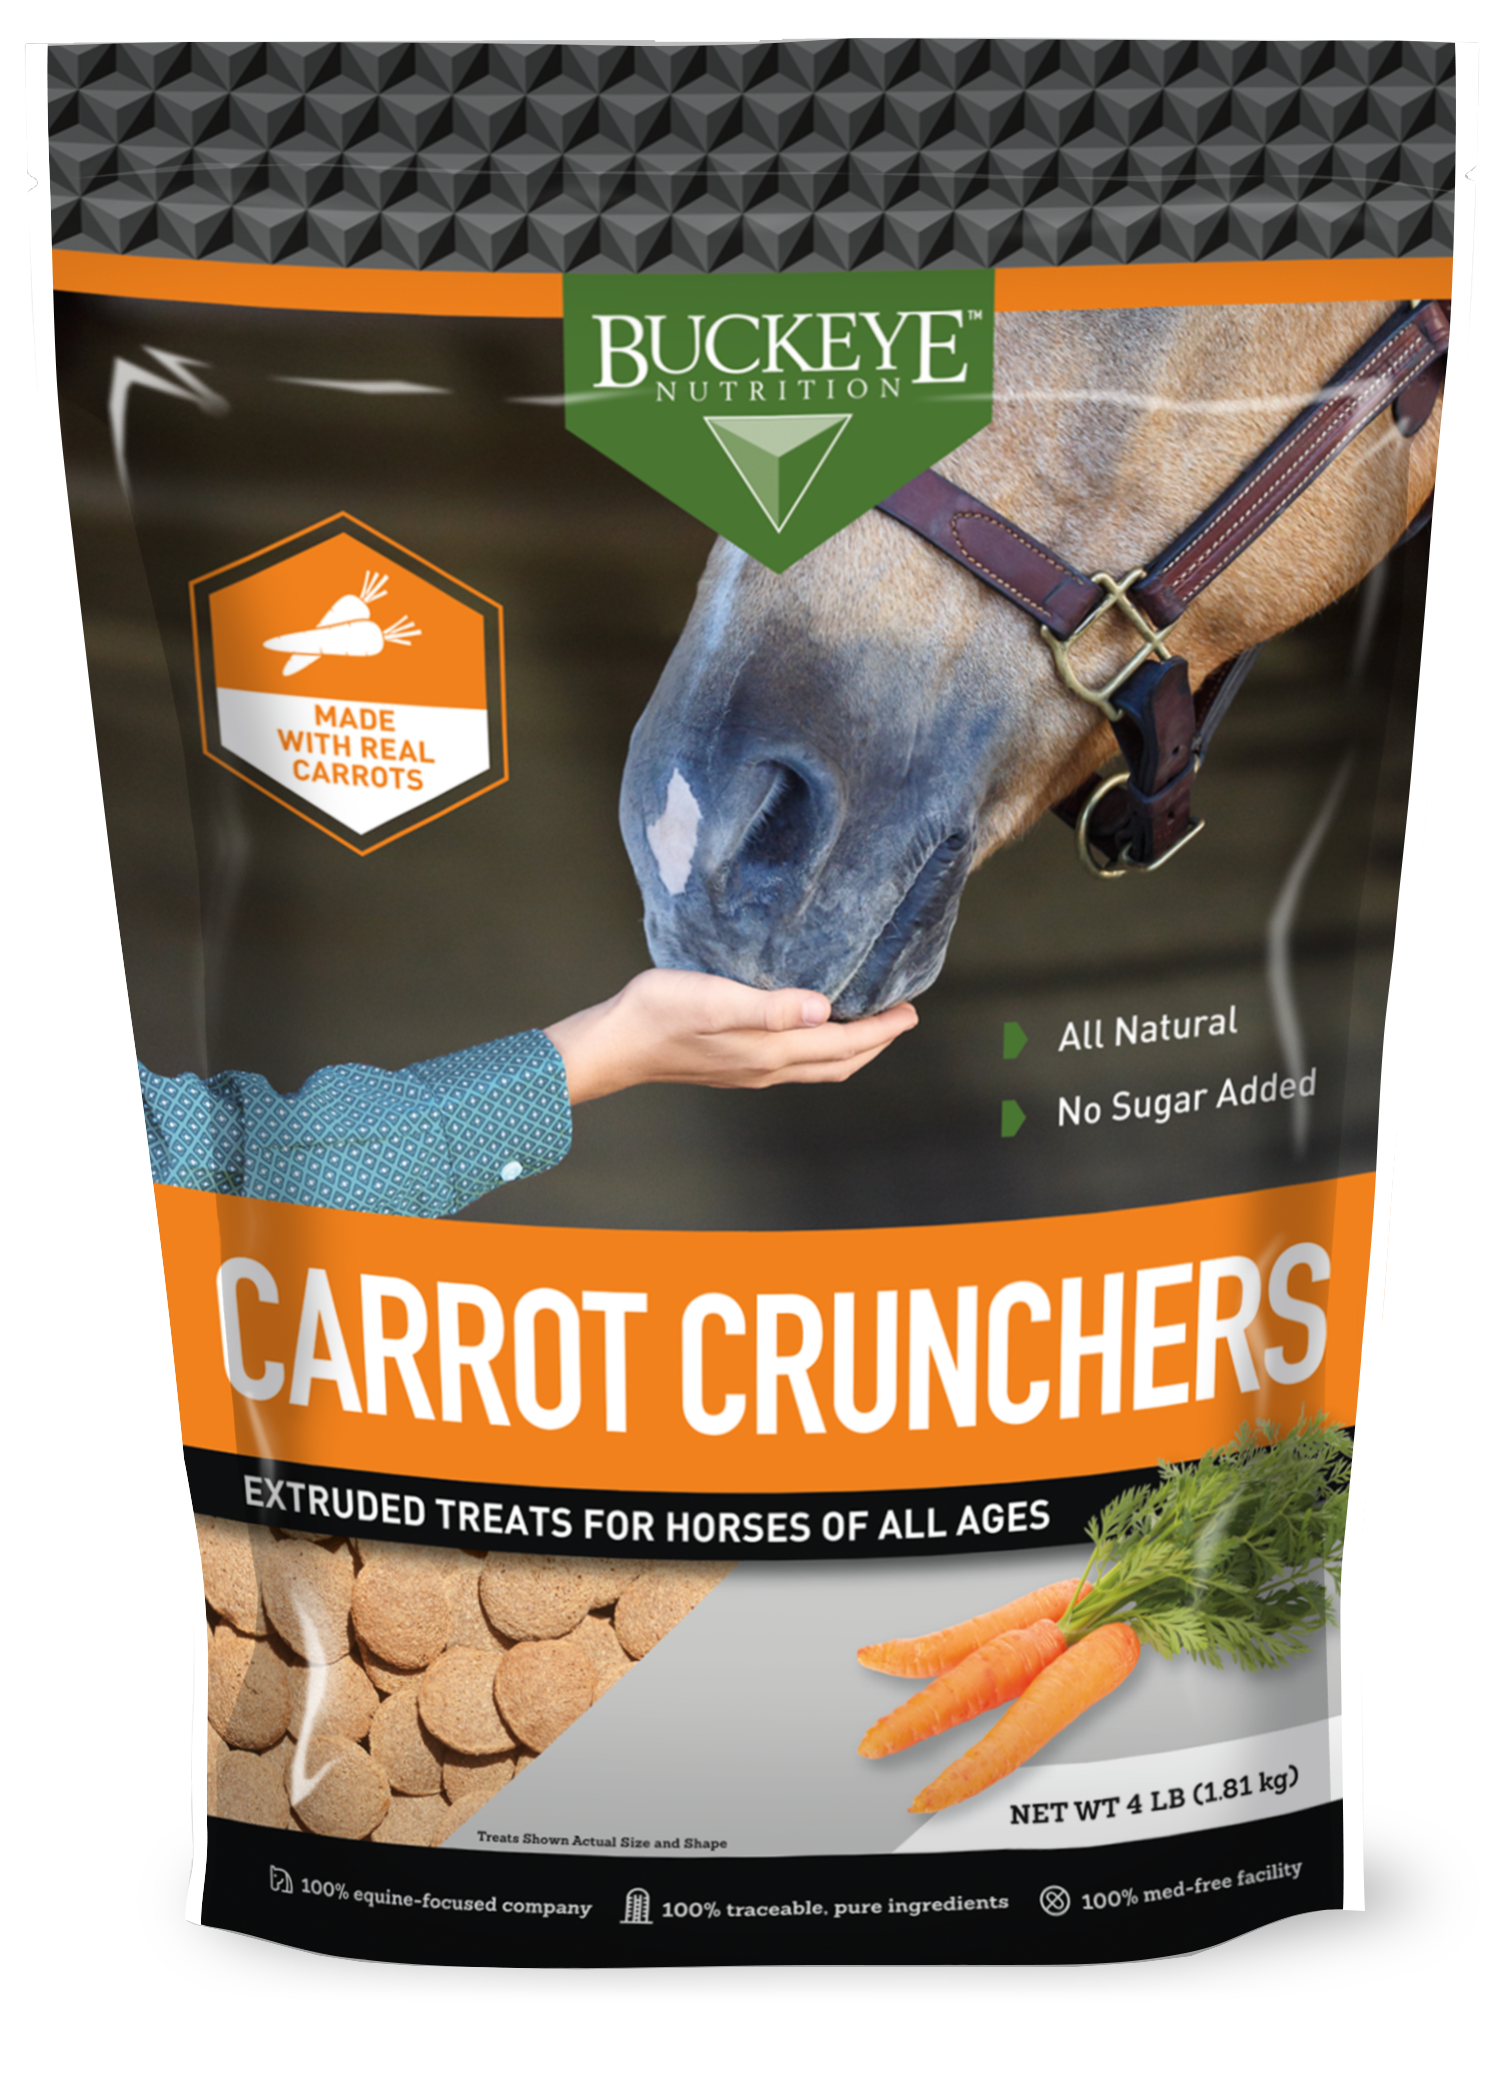 All Natural No Sugar Added Carrot Crunchers Treats package